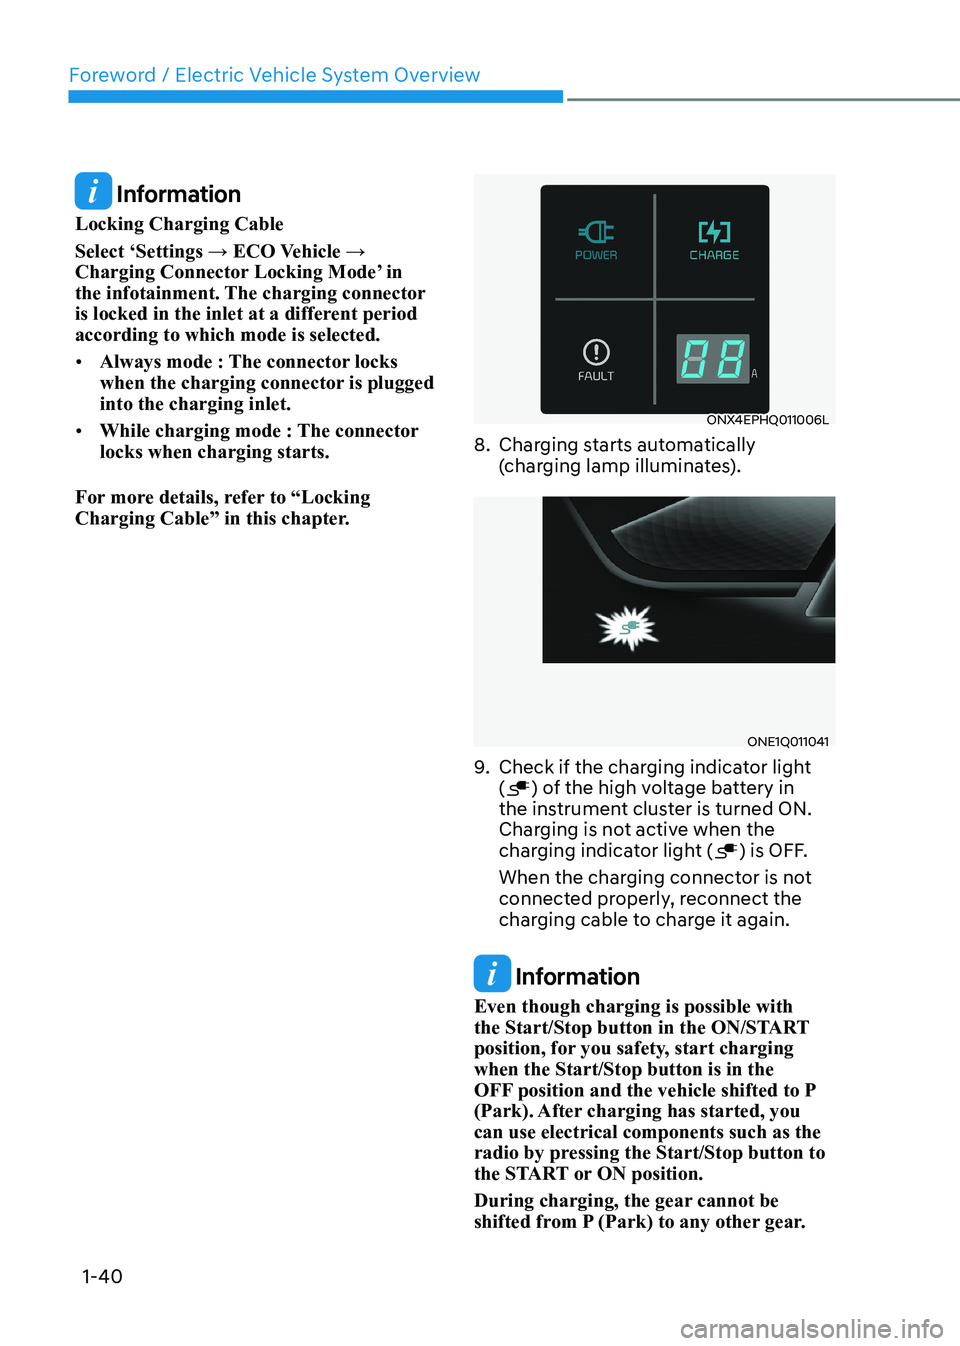 HYUNDAI IONIQ 5 2023  Owners Manual Foreword / Electric Vehicle System Overview
1-40
 Information
Locking Charging Cable 
Select ‘Settings → ECO Vehicle →  
Charging Connector Locking Mode’ in 
the infotainment. The charging con